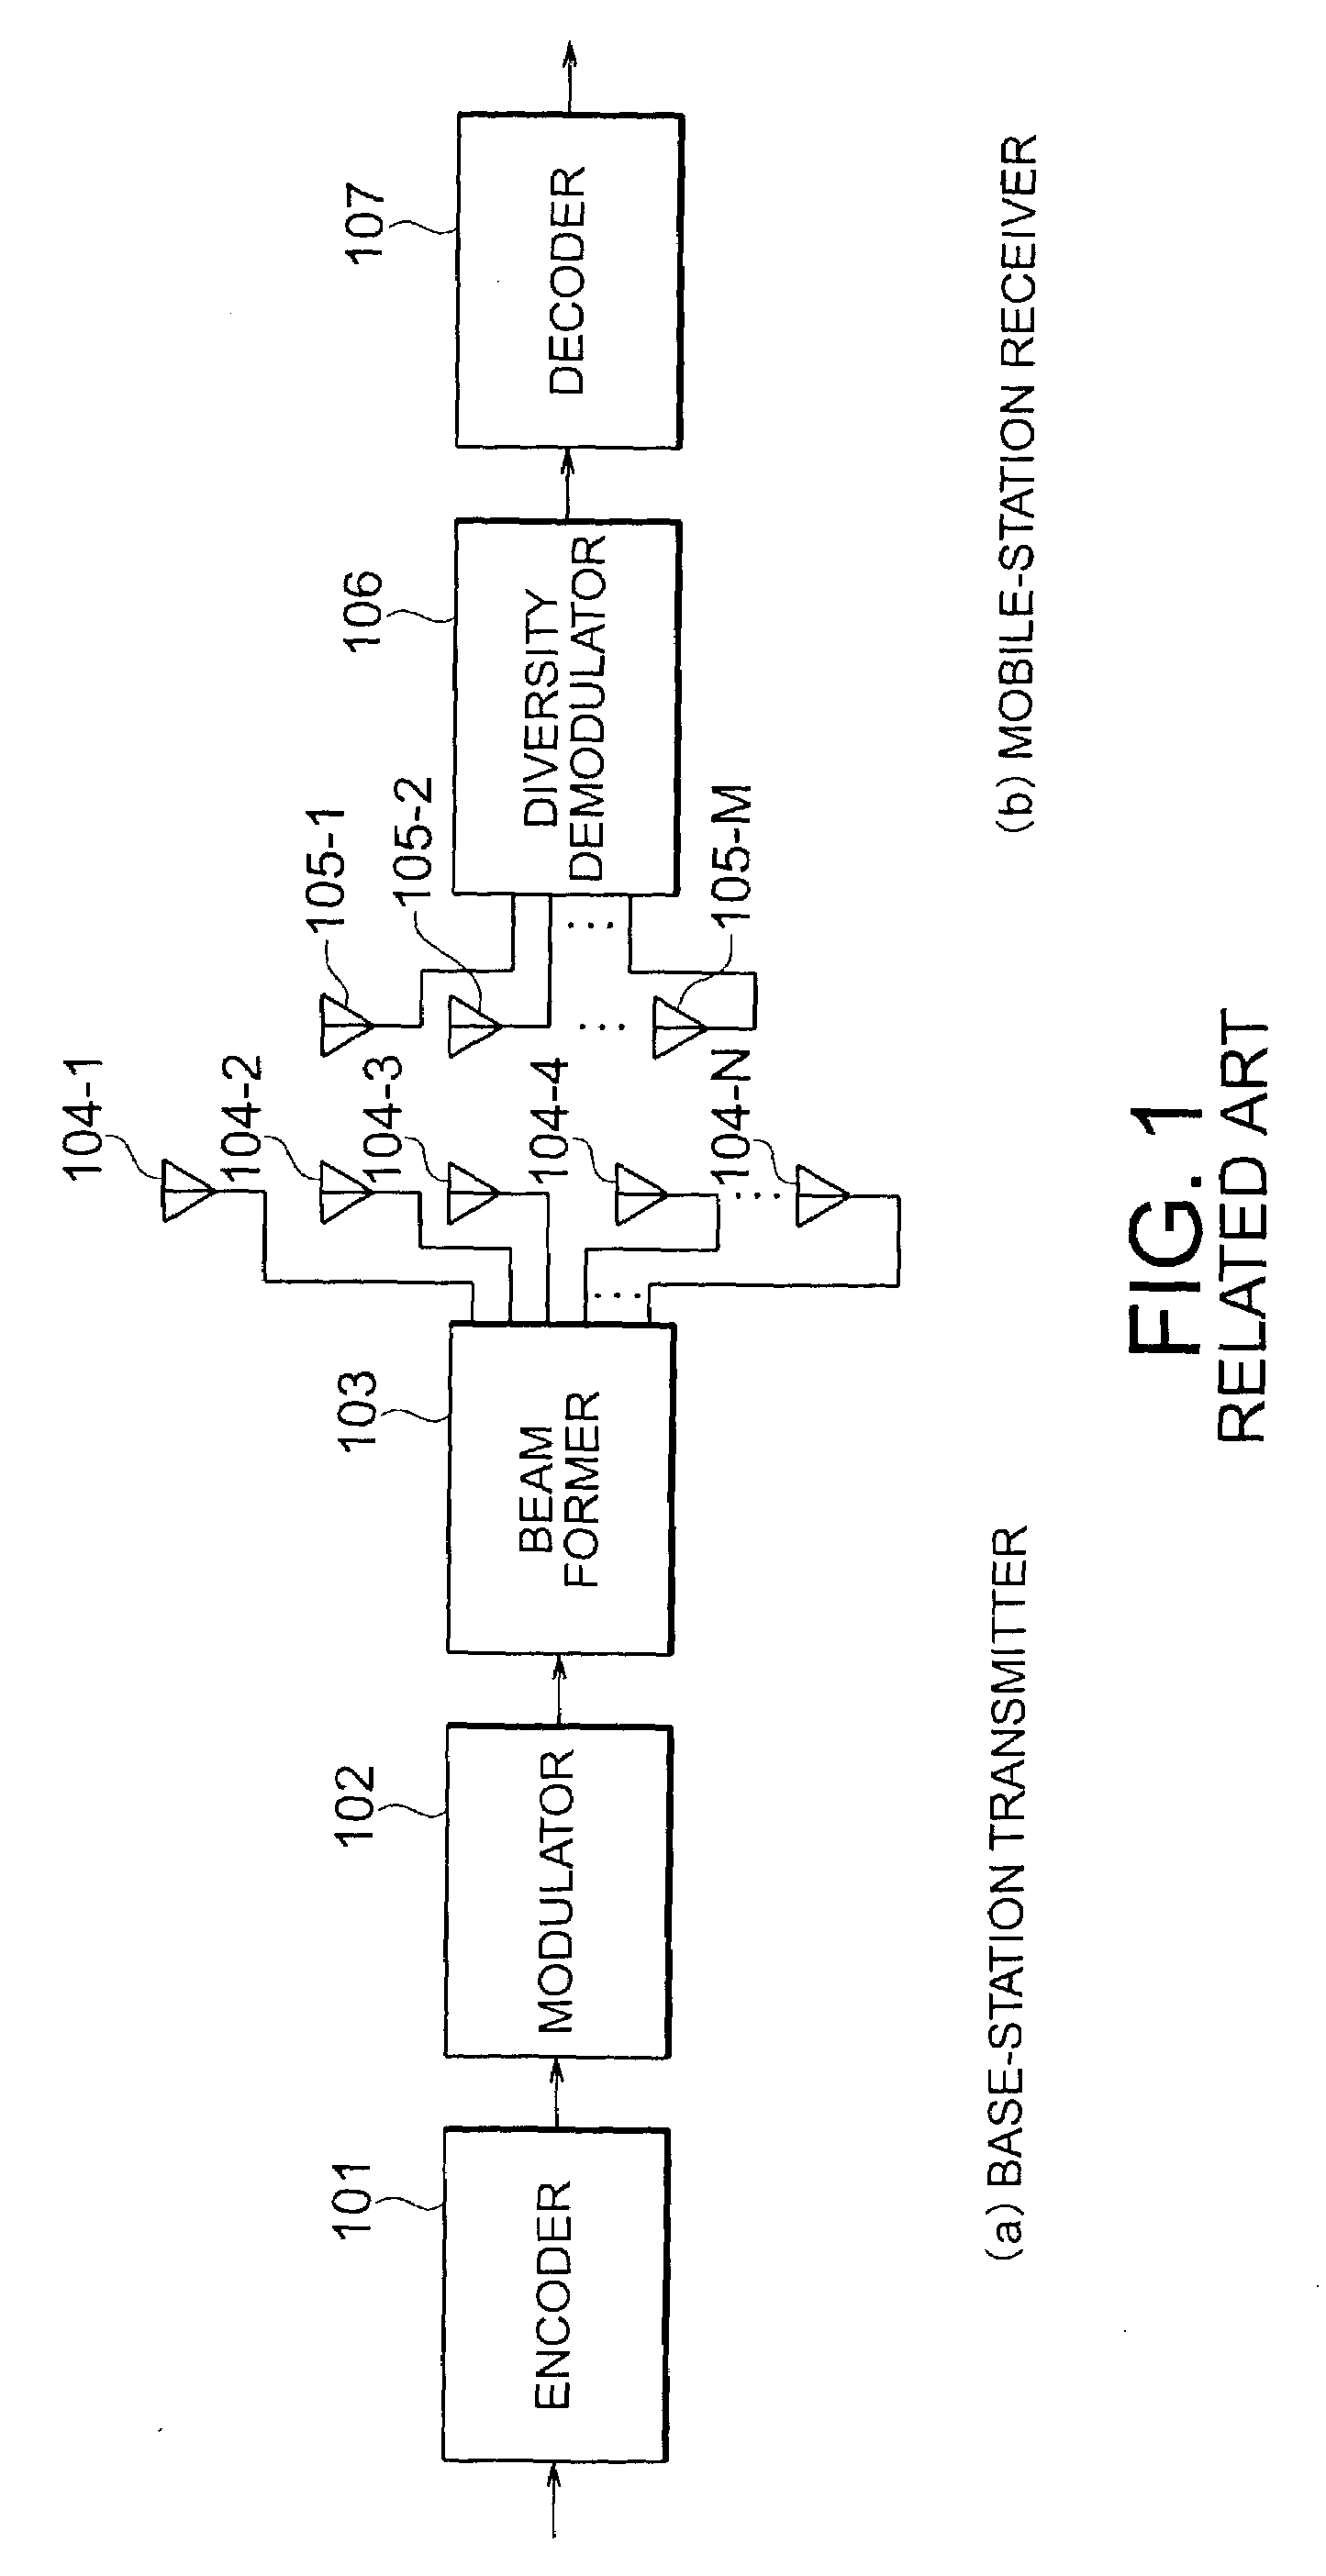 Antenna transmission and reception system